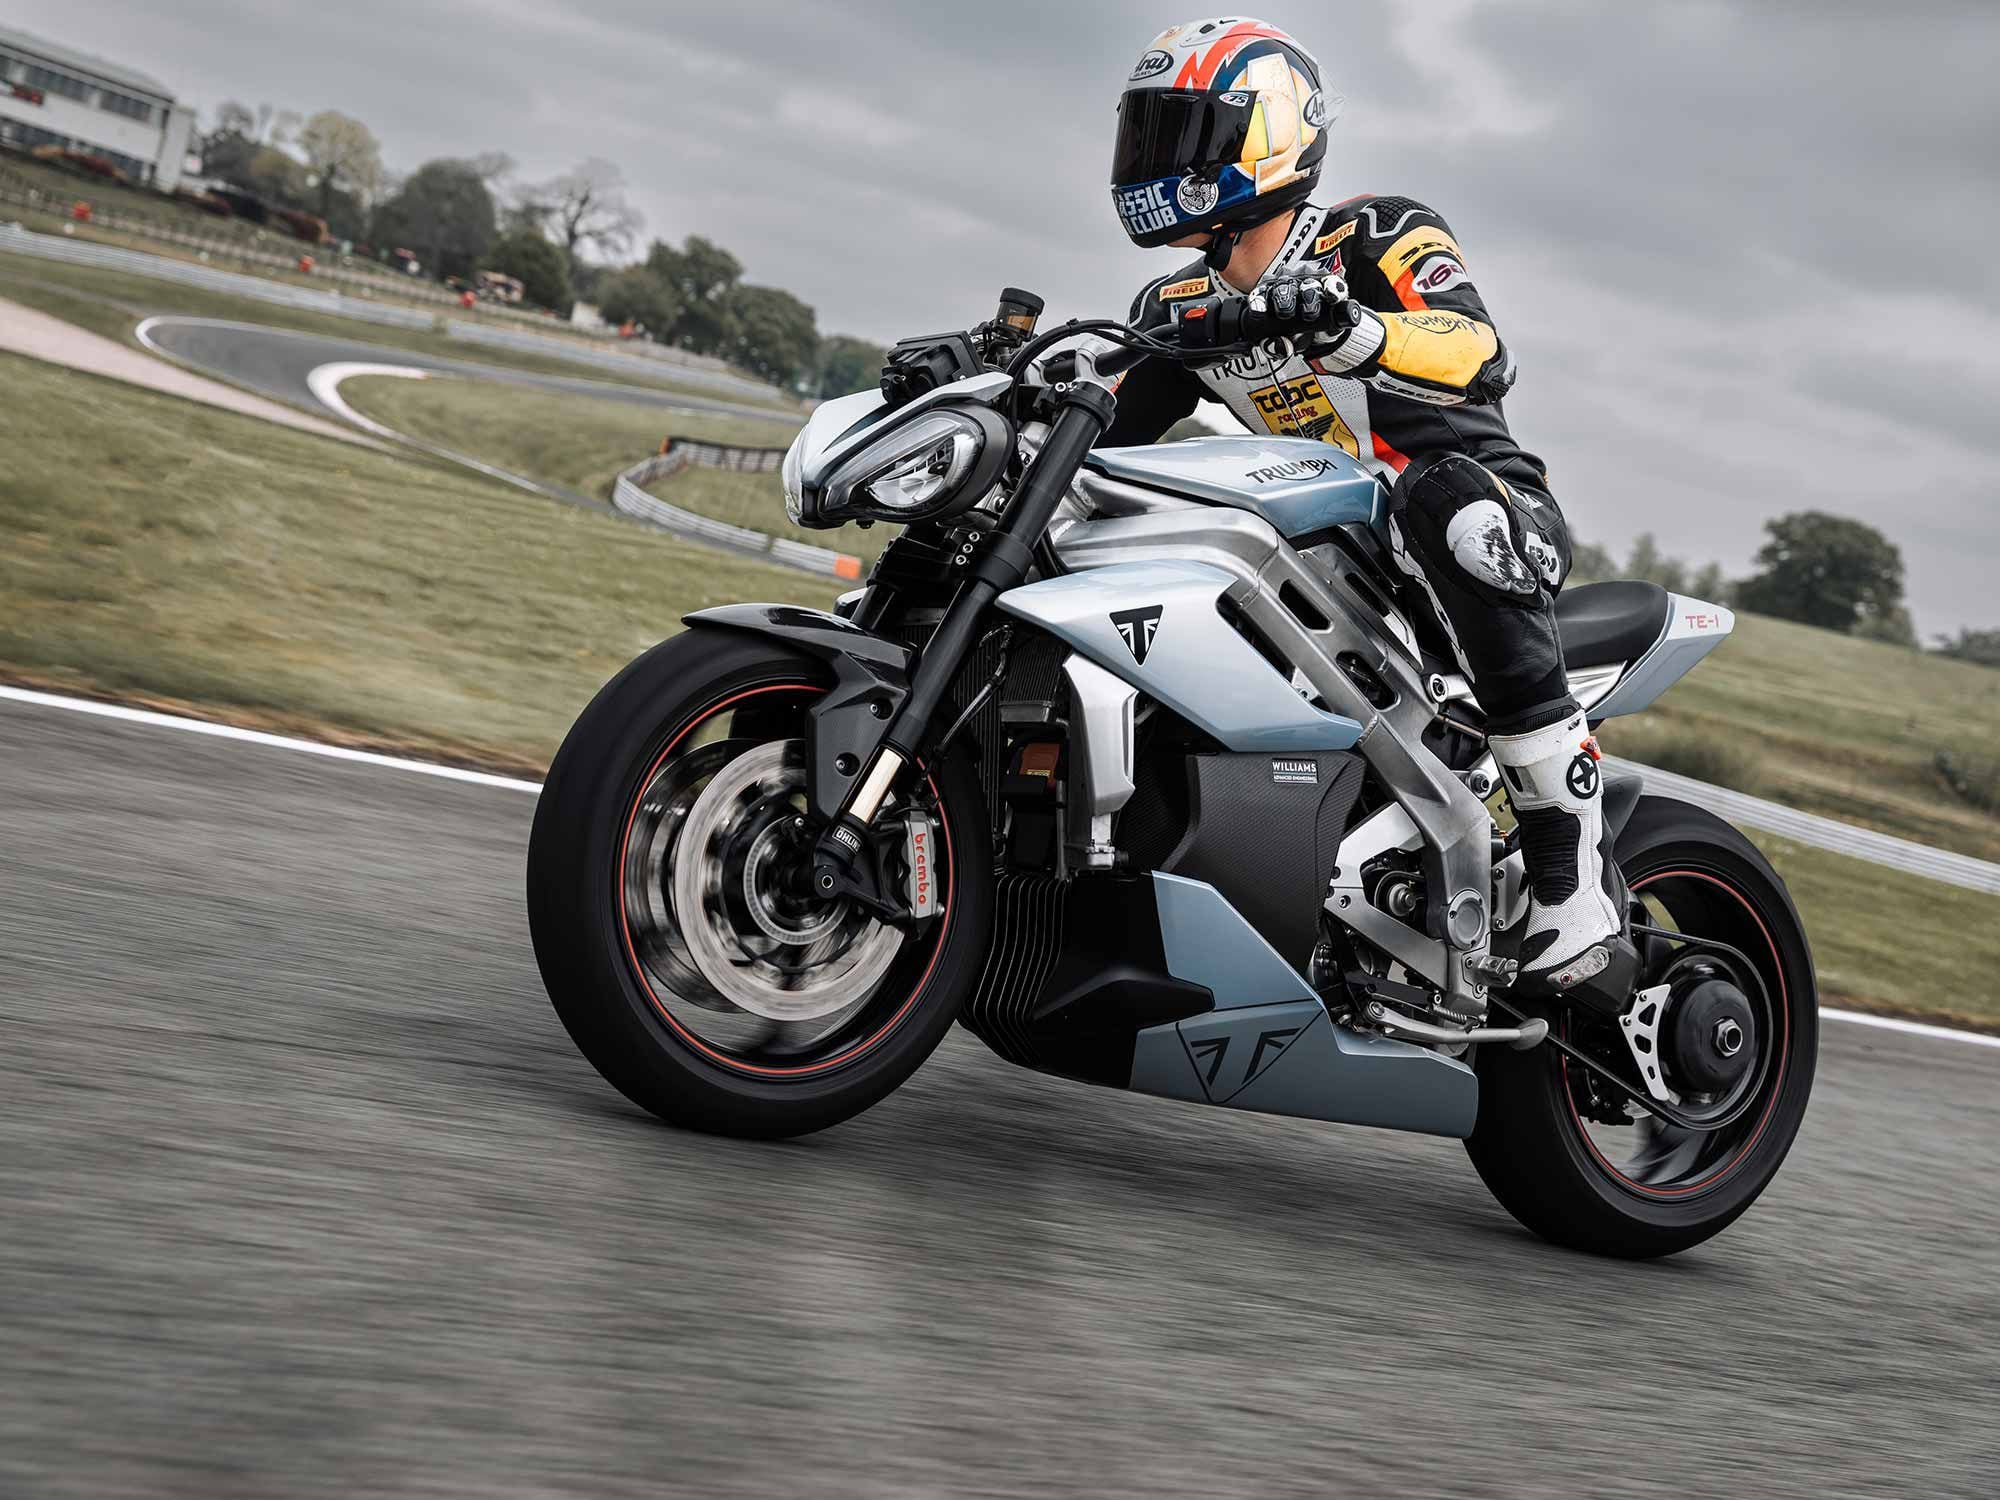 Triumph has released testing details from its TE-1 Electric prototype, but the firm also says a new electric motorcycle is still over the horizon.